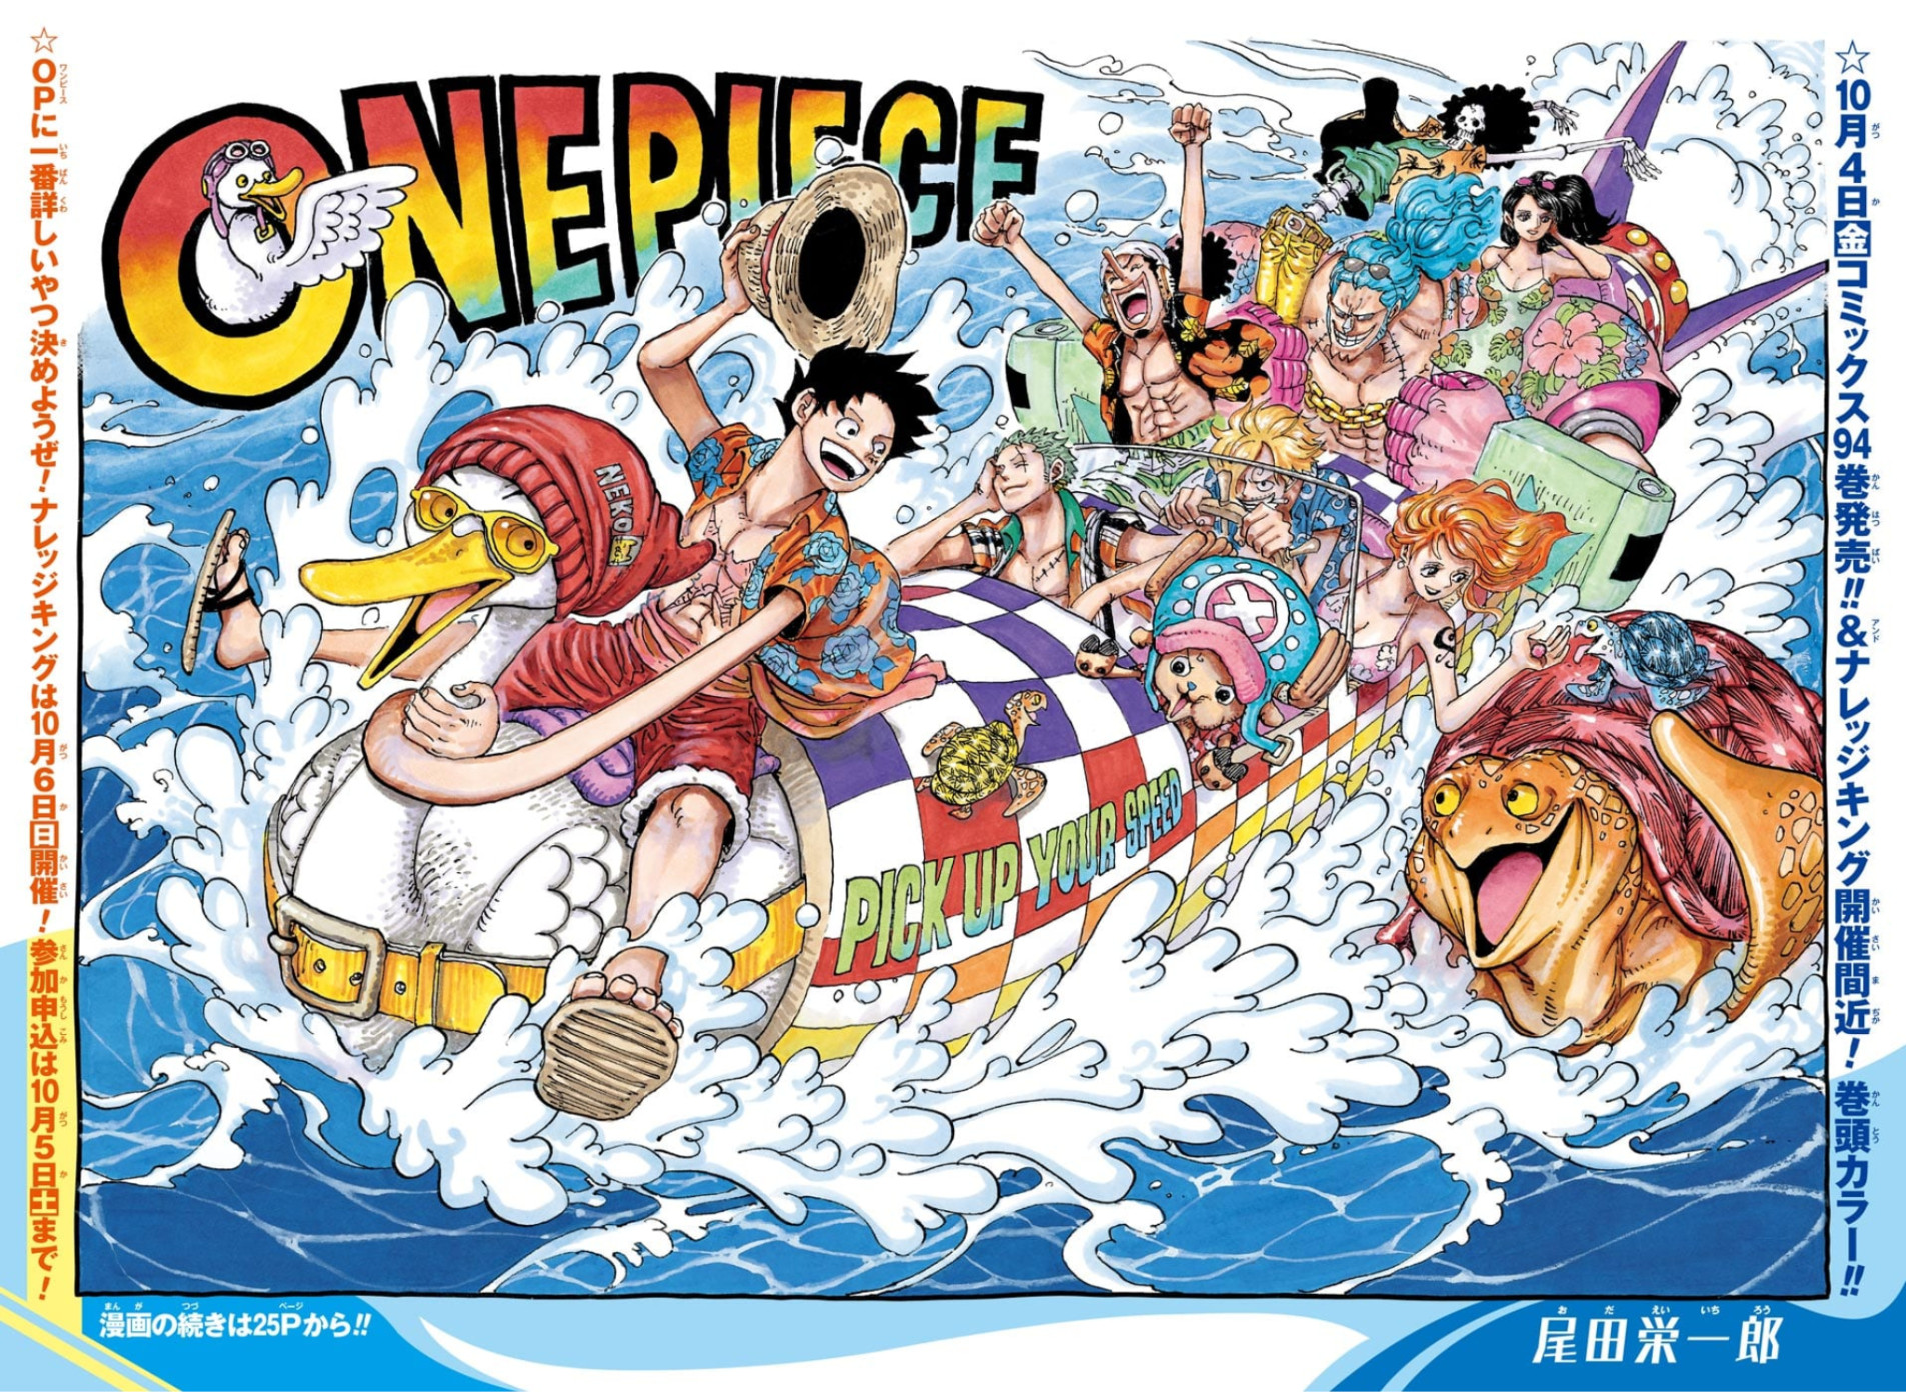 One Piece Chapter 1058 Raw Scan: All new bounties of the Straw Hat crew  revealed!